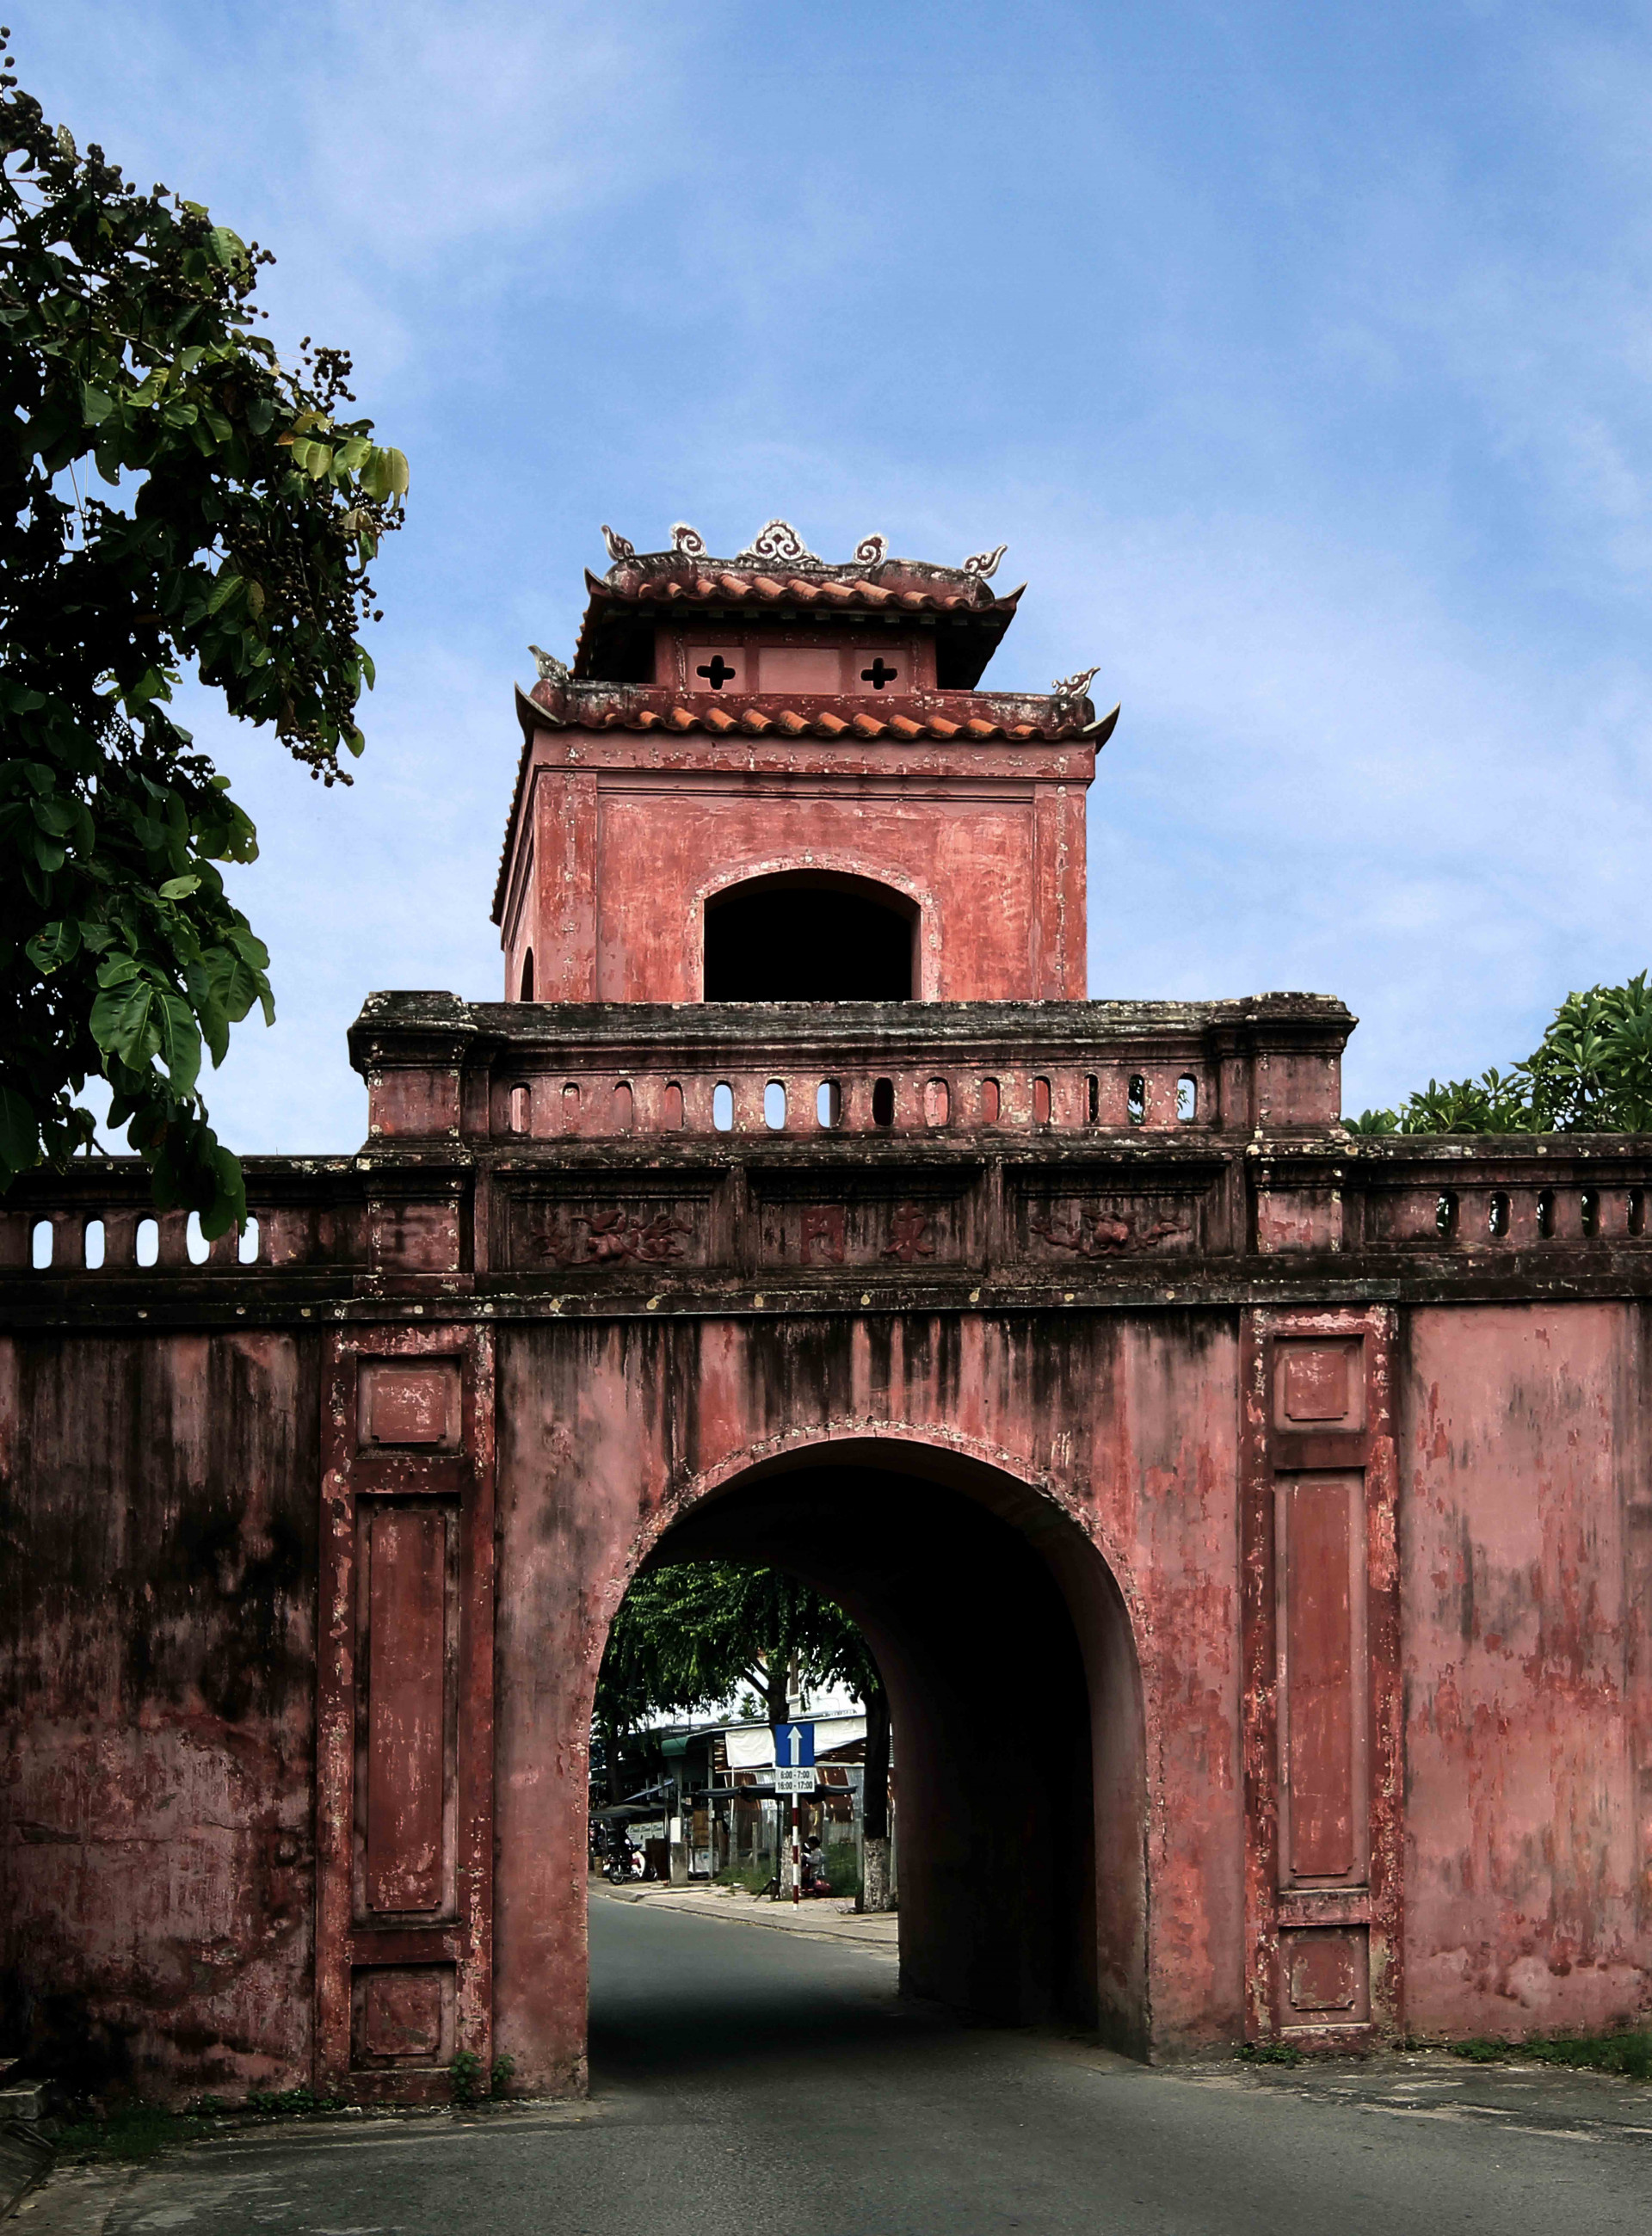 Dien Khanh Citadel was built in the early years of Nguyen Dynasty, recognized as national monument of culture and history in 1998.